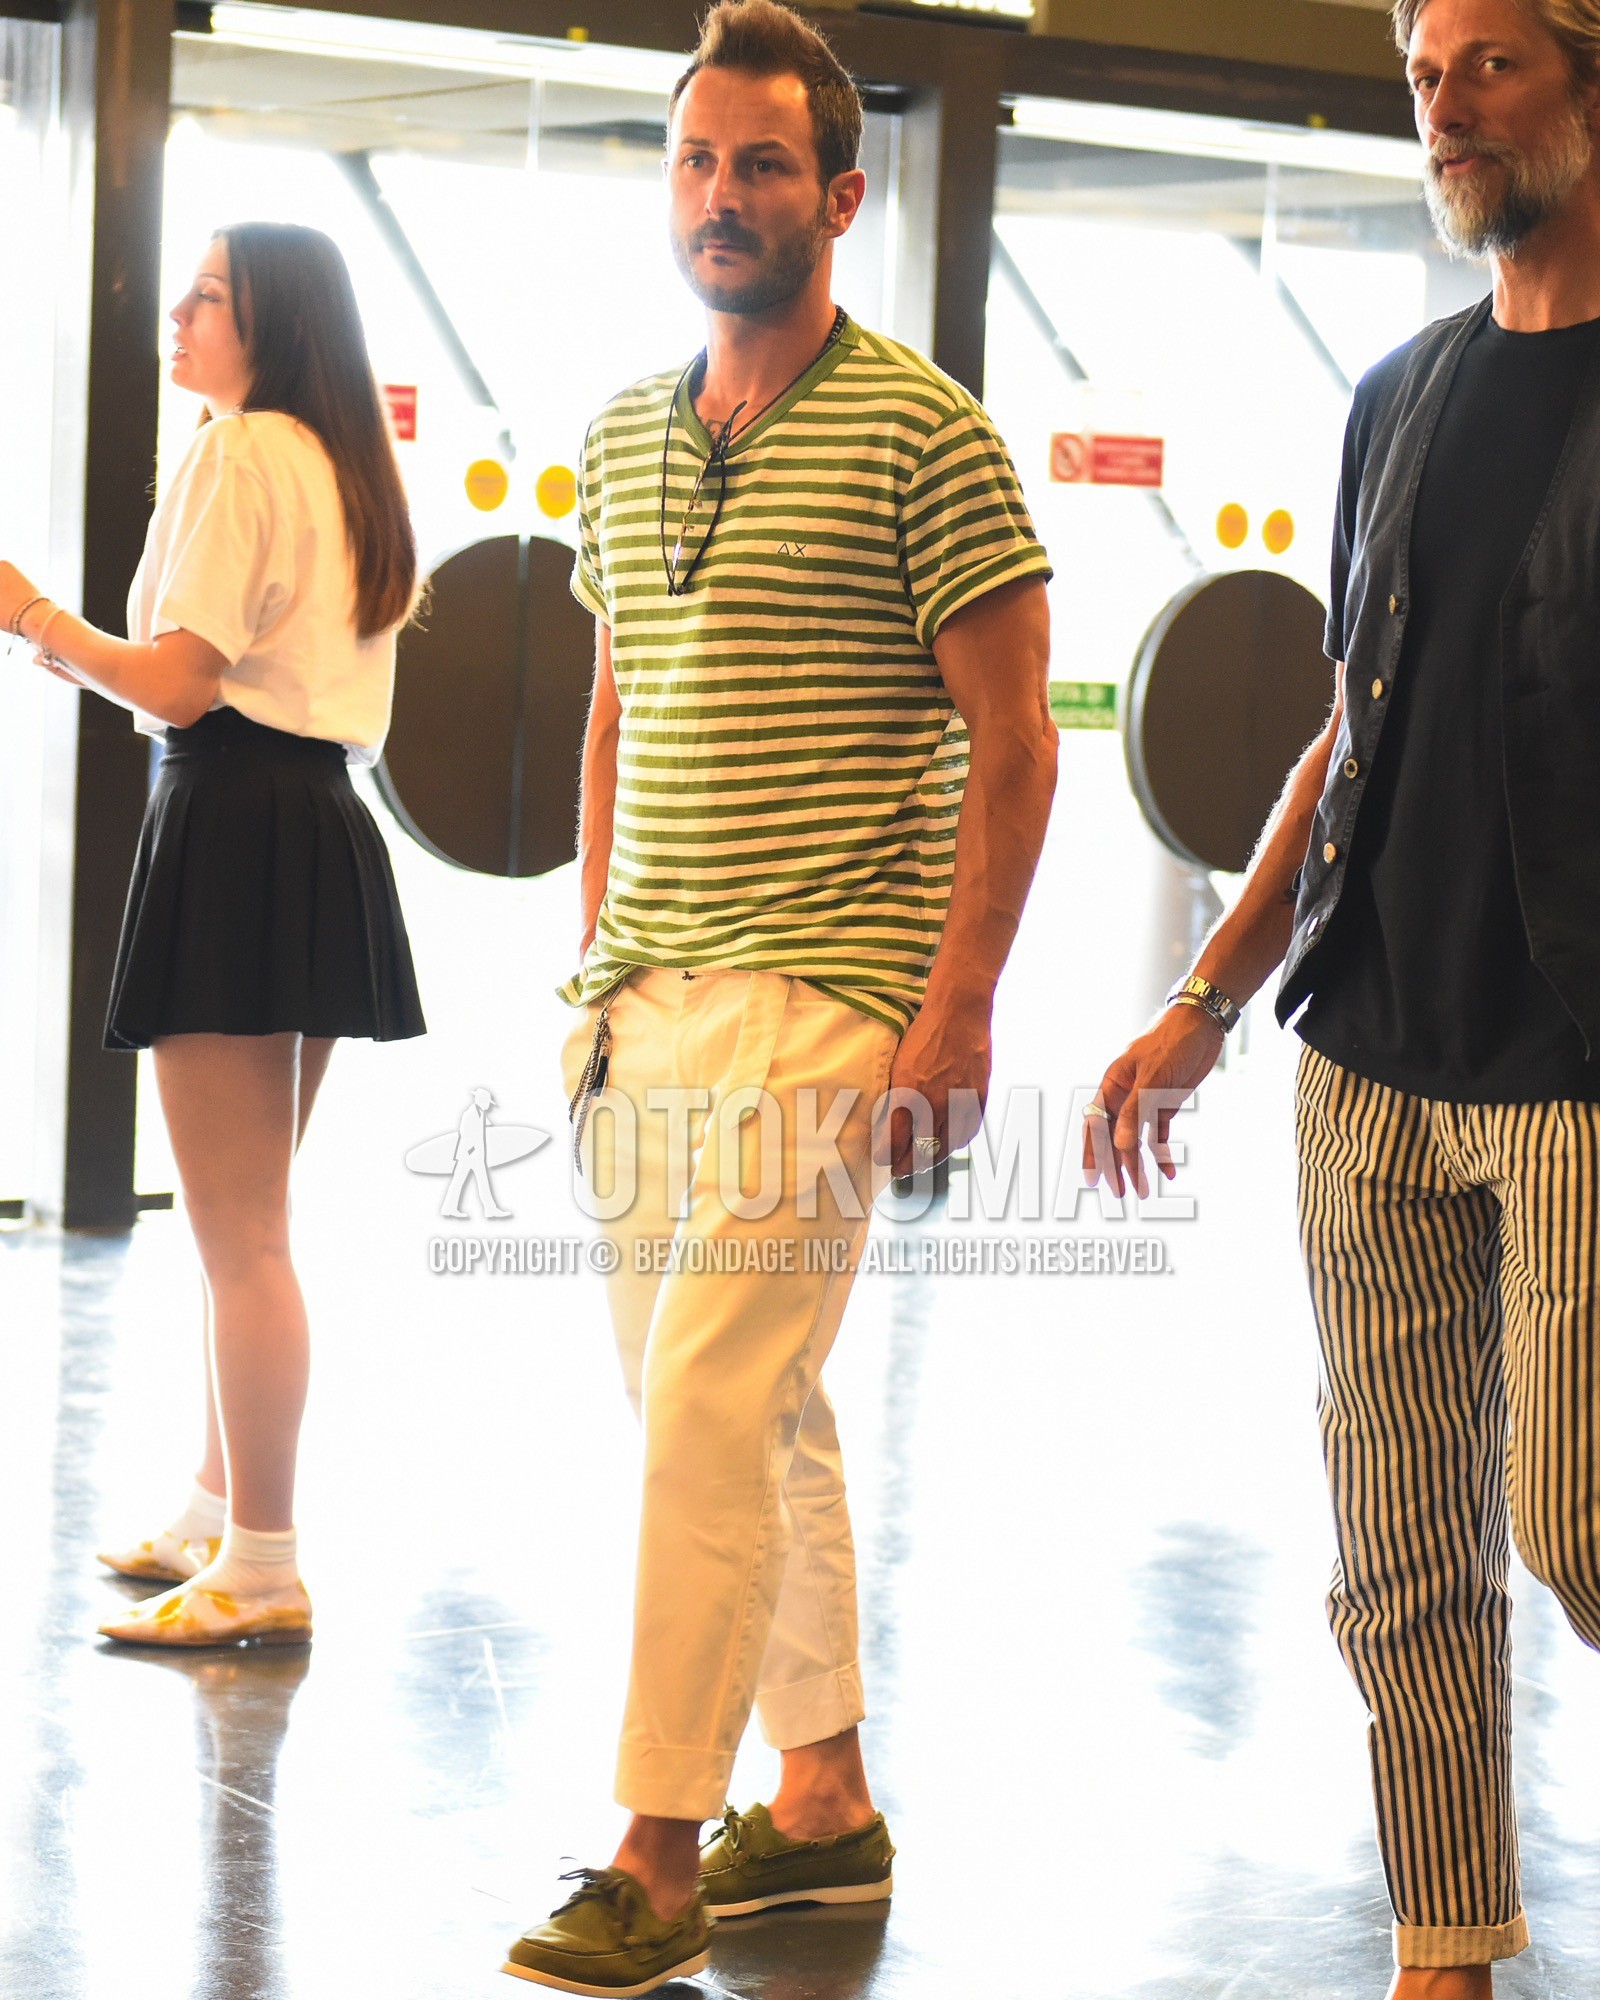 Men's spring summer outfit with green horizontal stripes t-shirt, white plain cotton pants, olive green moccasins/deck shoes leather shoes.